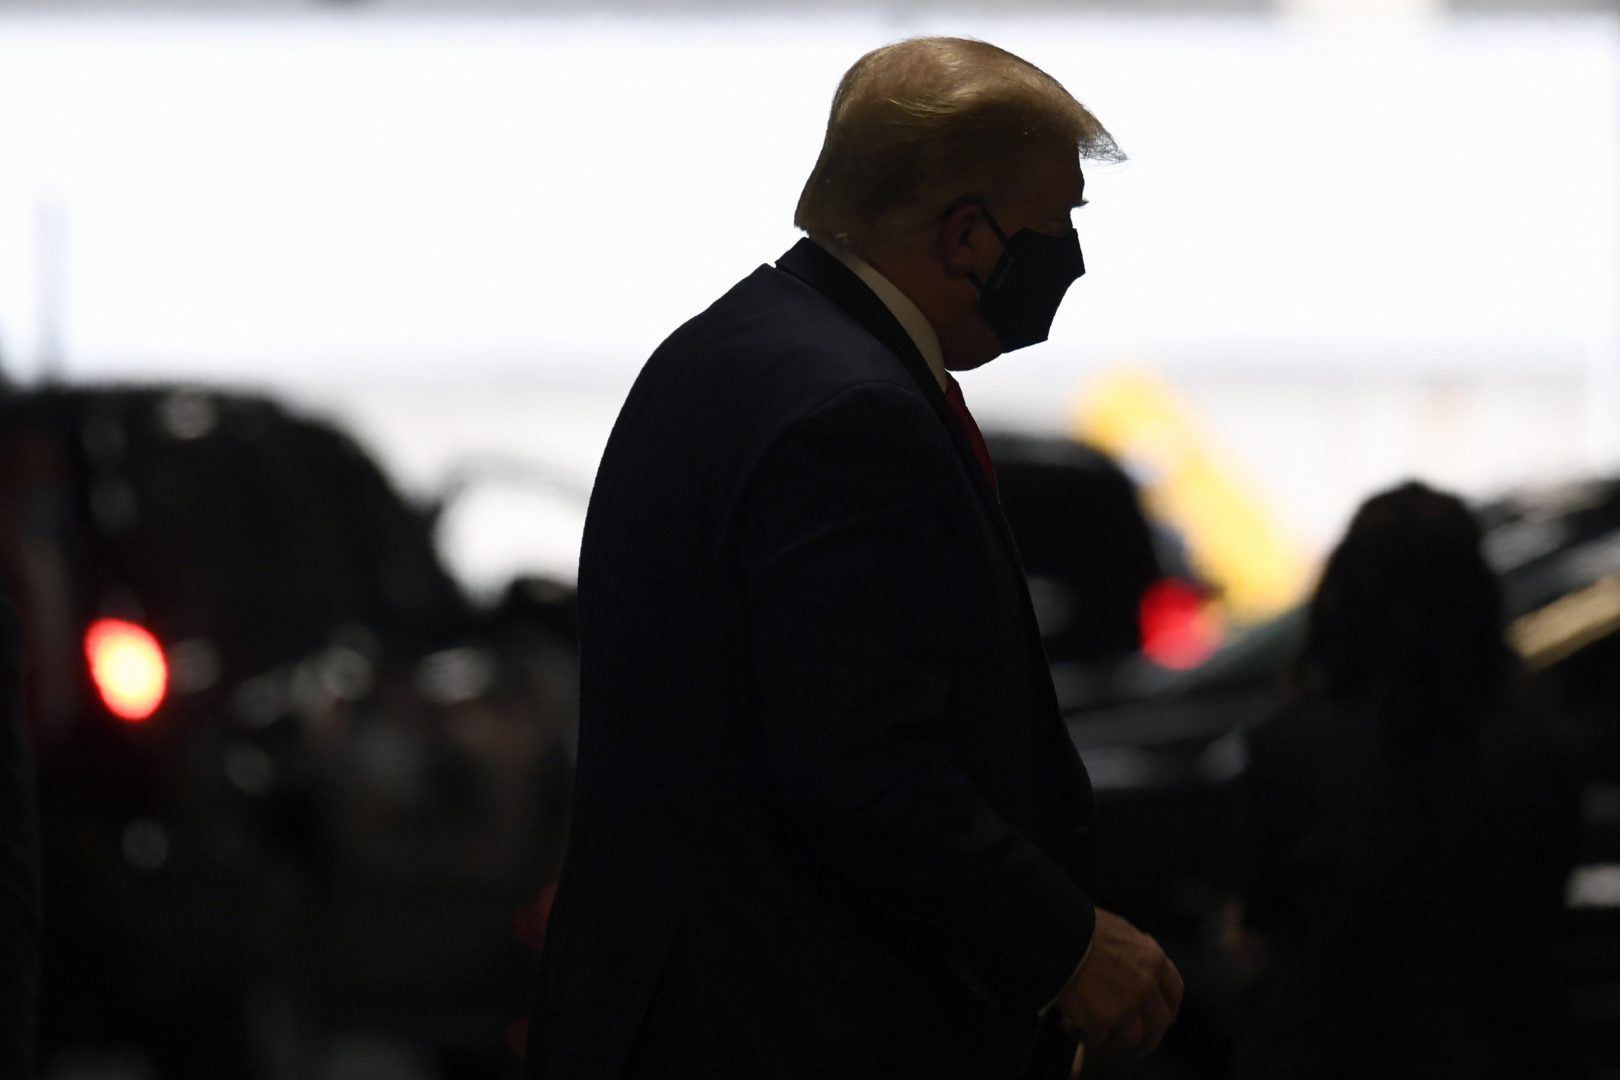 President Donald Trump steps out of his vehicle with a face mask on in New York, Friday, Aug. 14, 2020, on his way to visit with his younger brother, Robert Trump, who has been hospitalized in New York. (AP Photo/Susan Walsh)